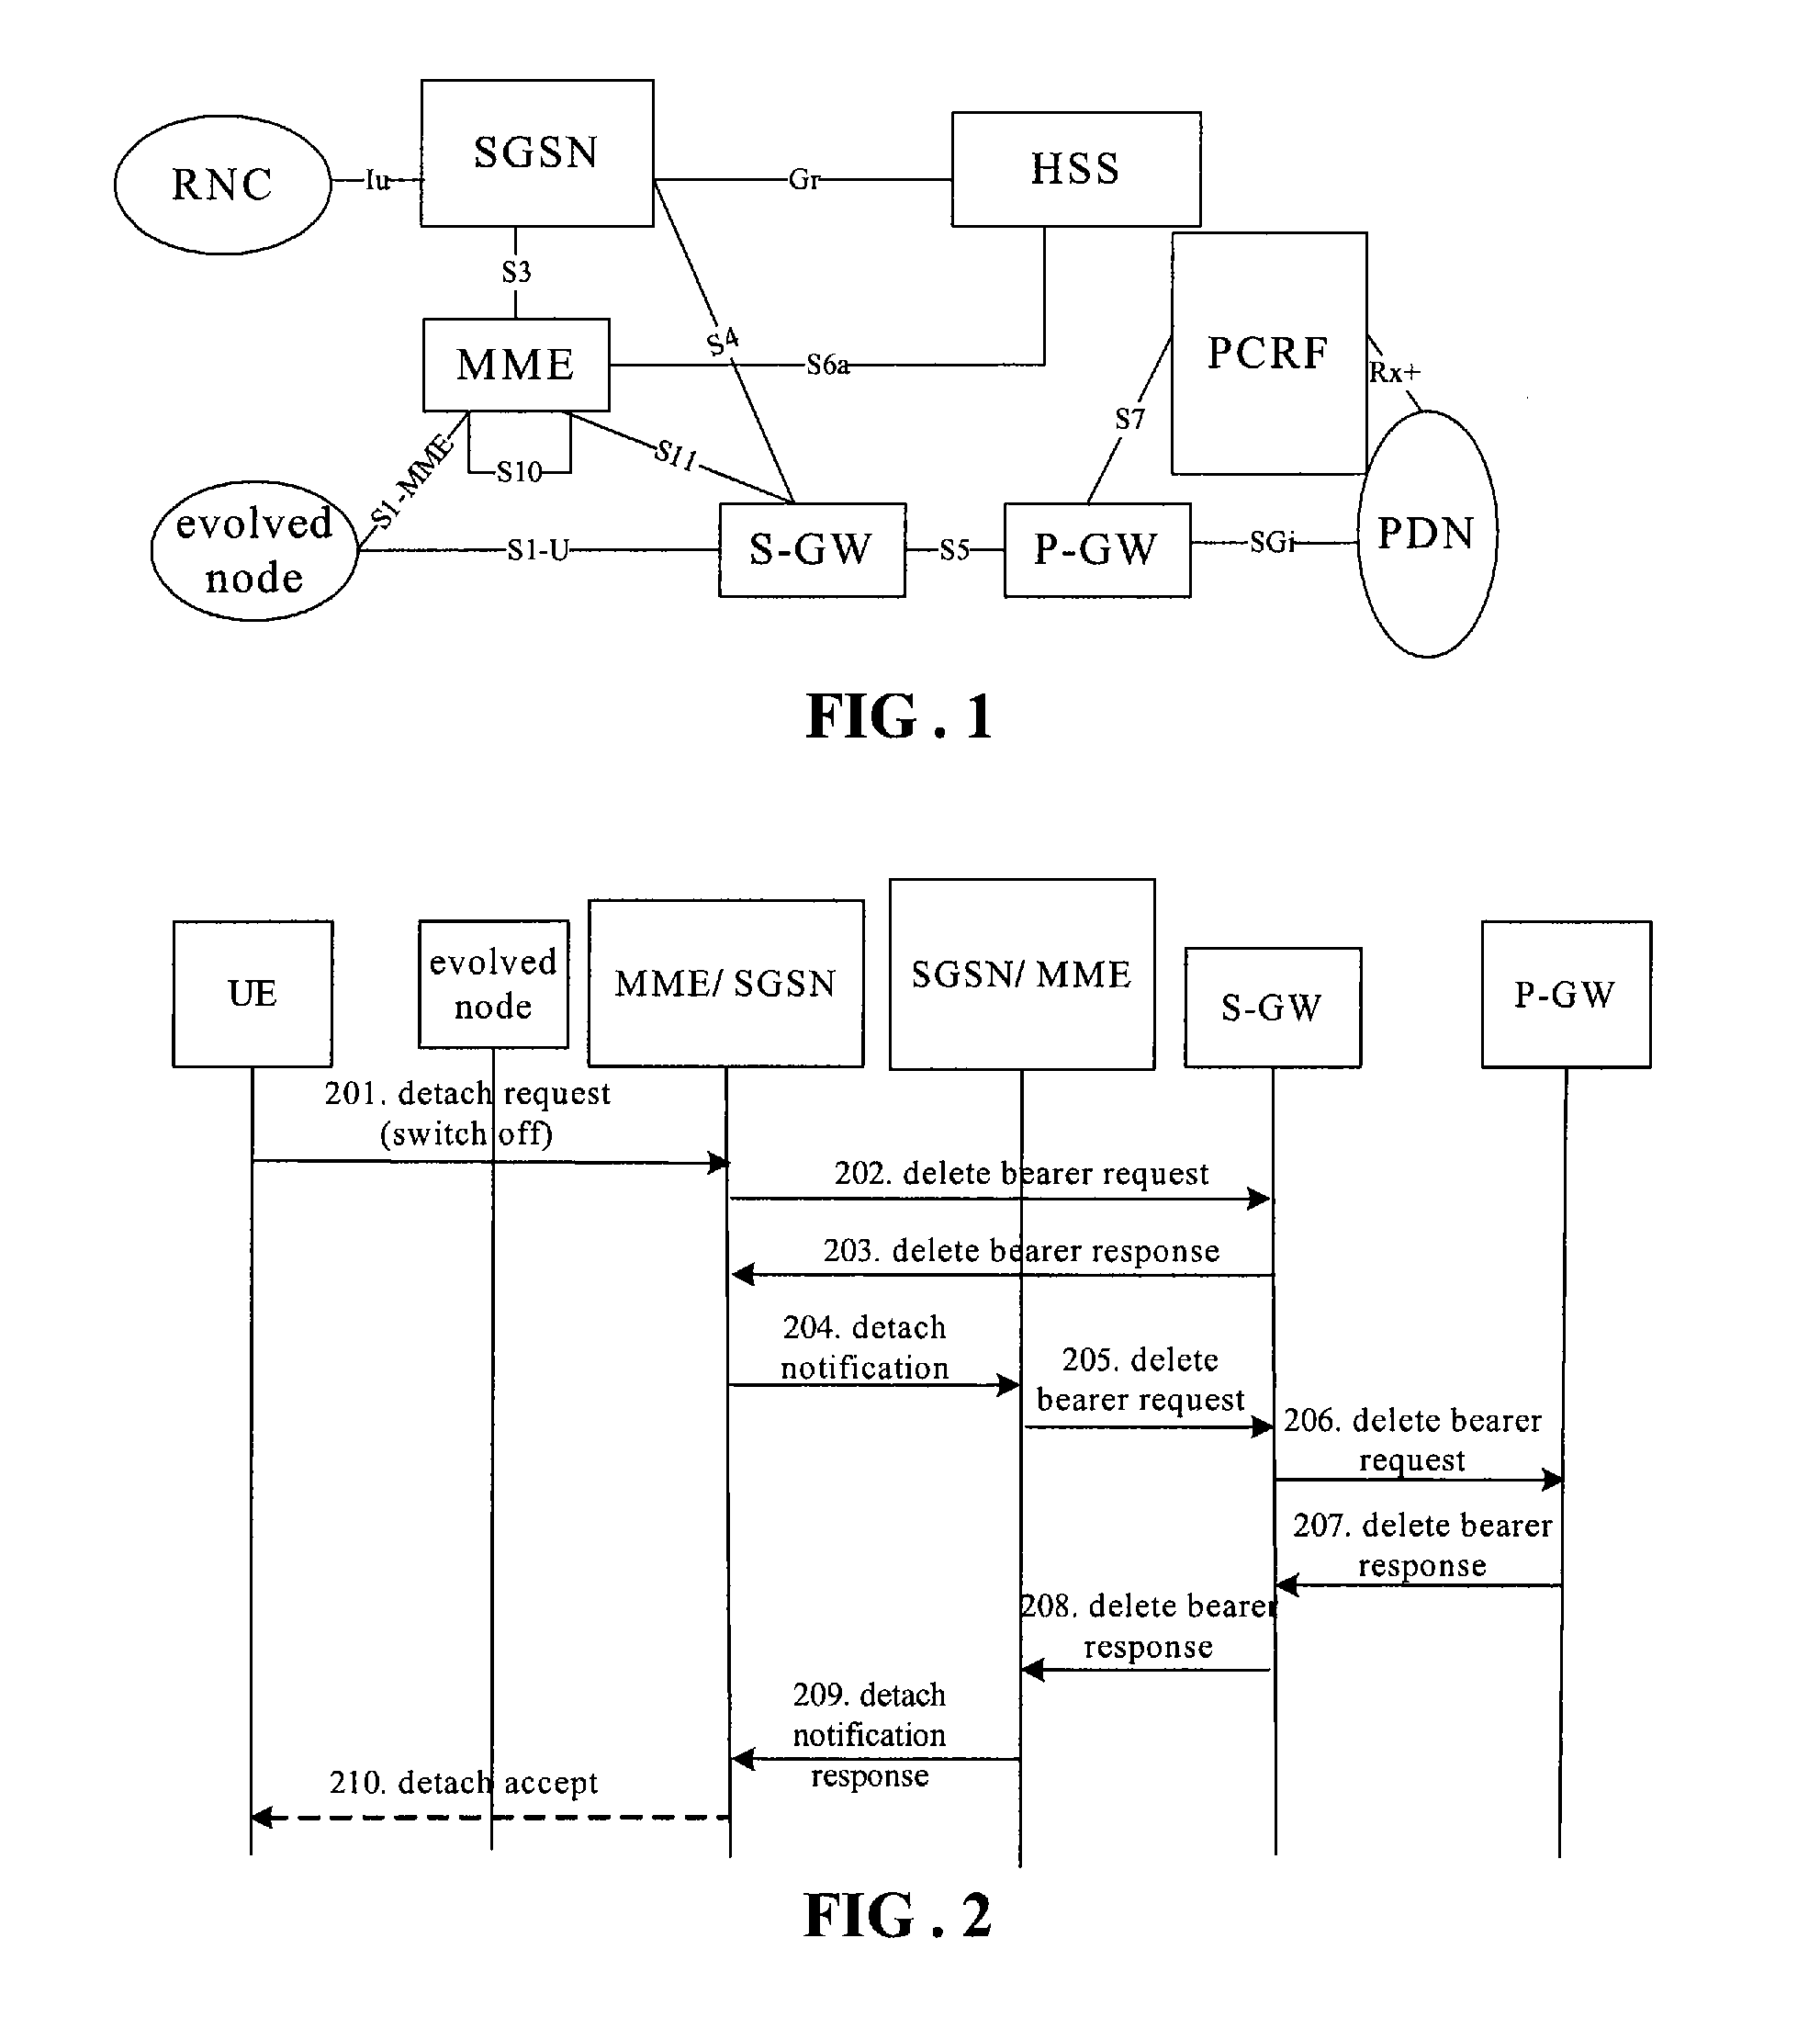 Method for detaching network, a method for deactivating isr and an indicating device thereof